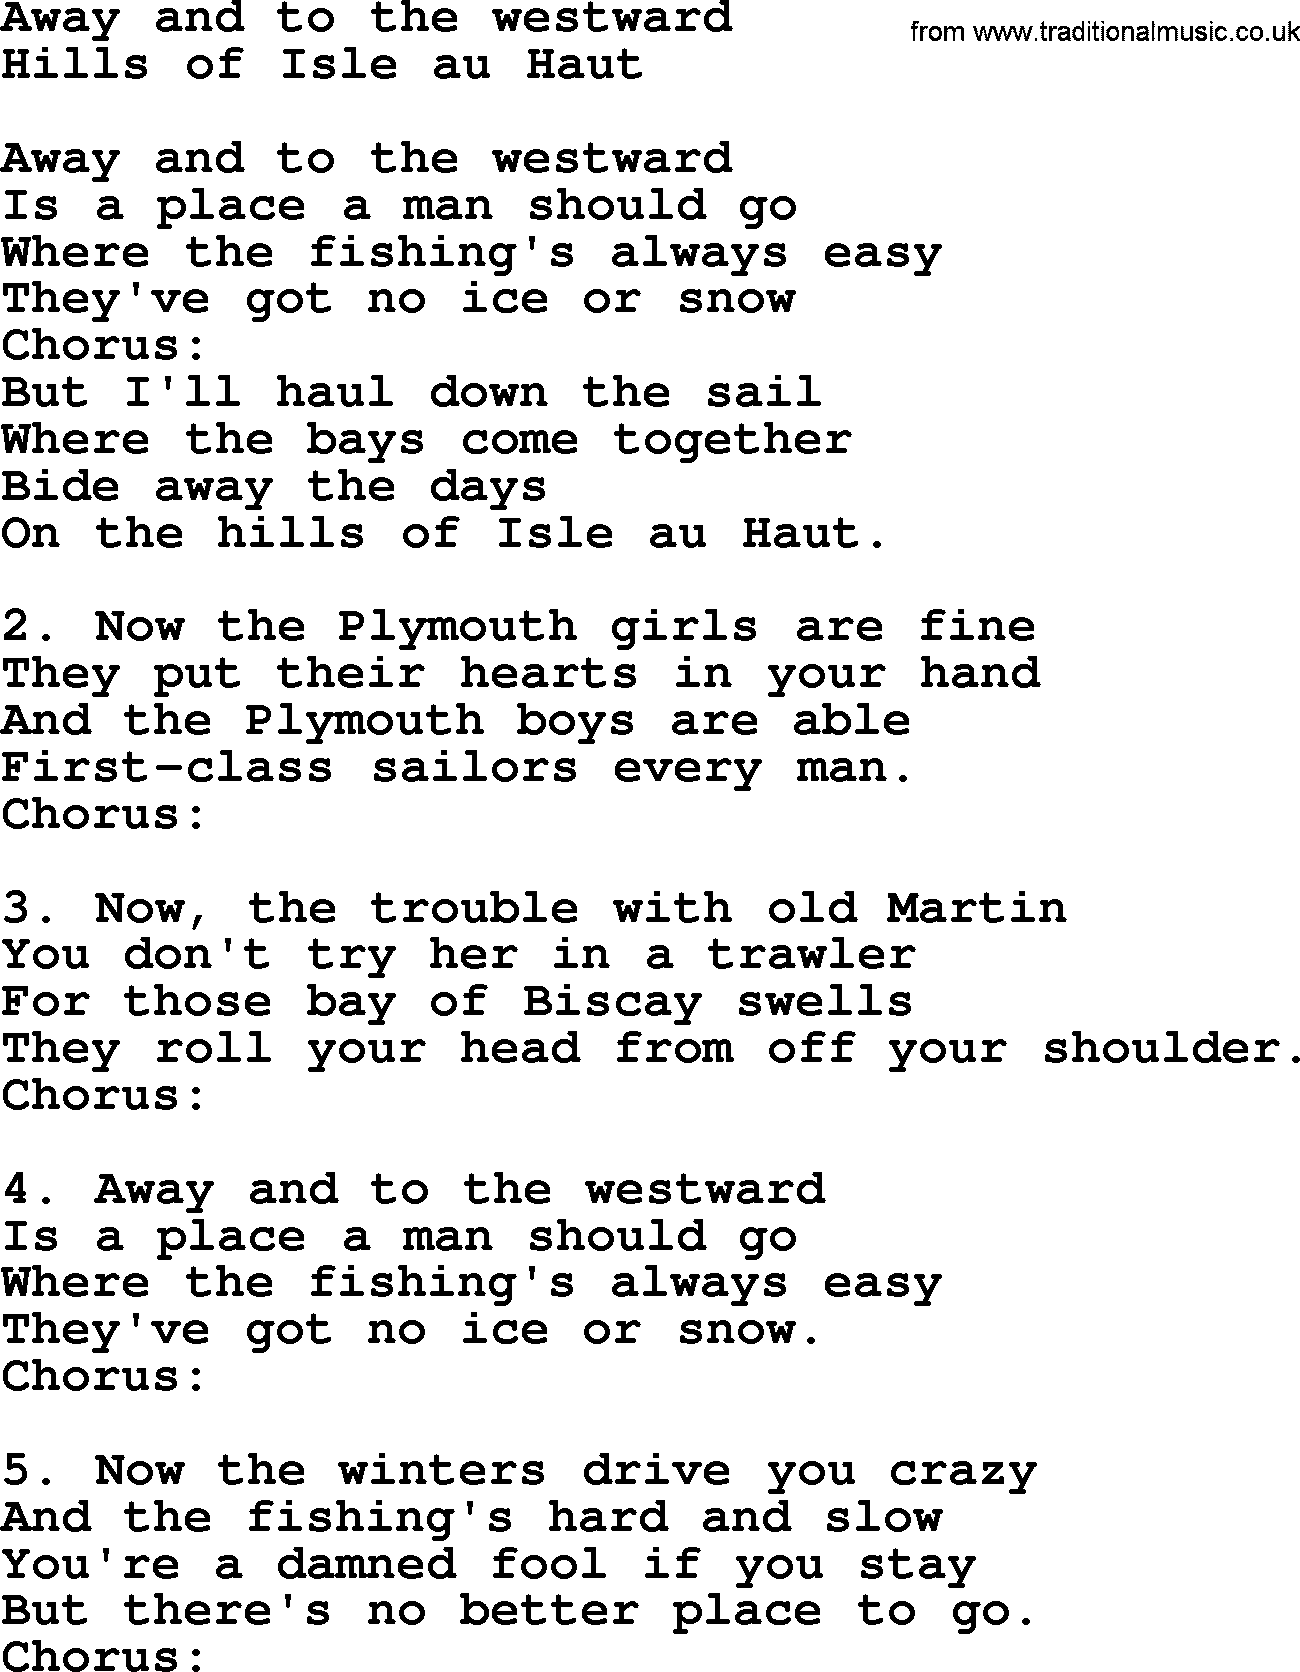 Sea Song or Shantie: Away And To The Westward, lyrics